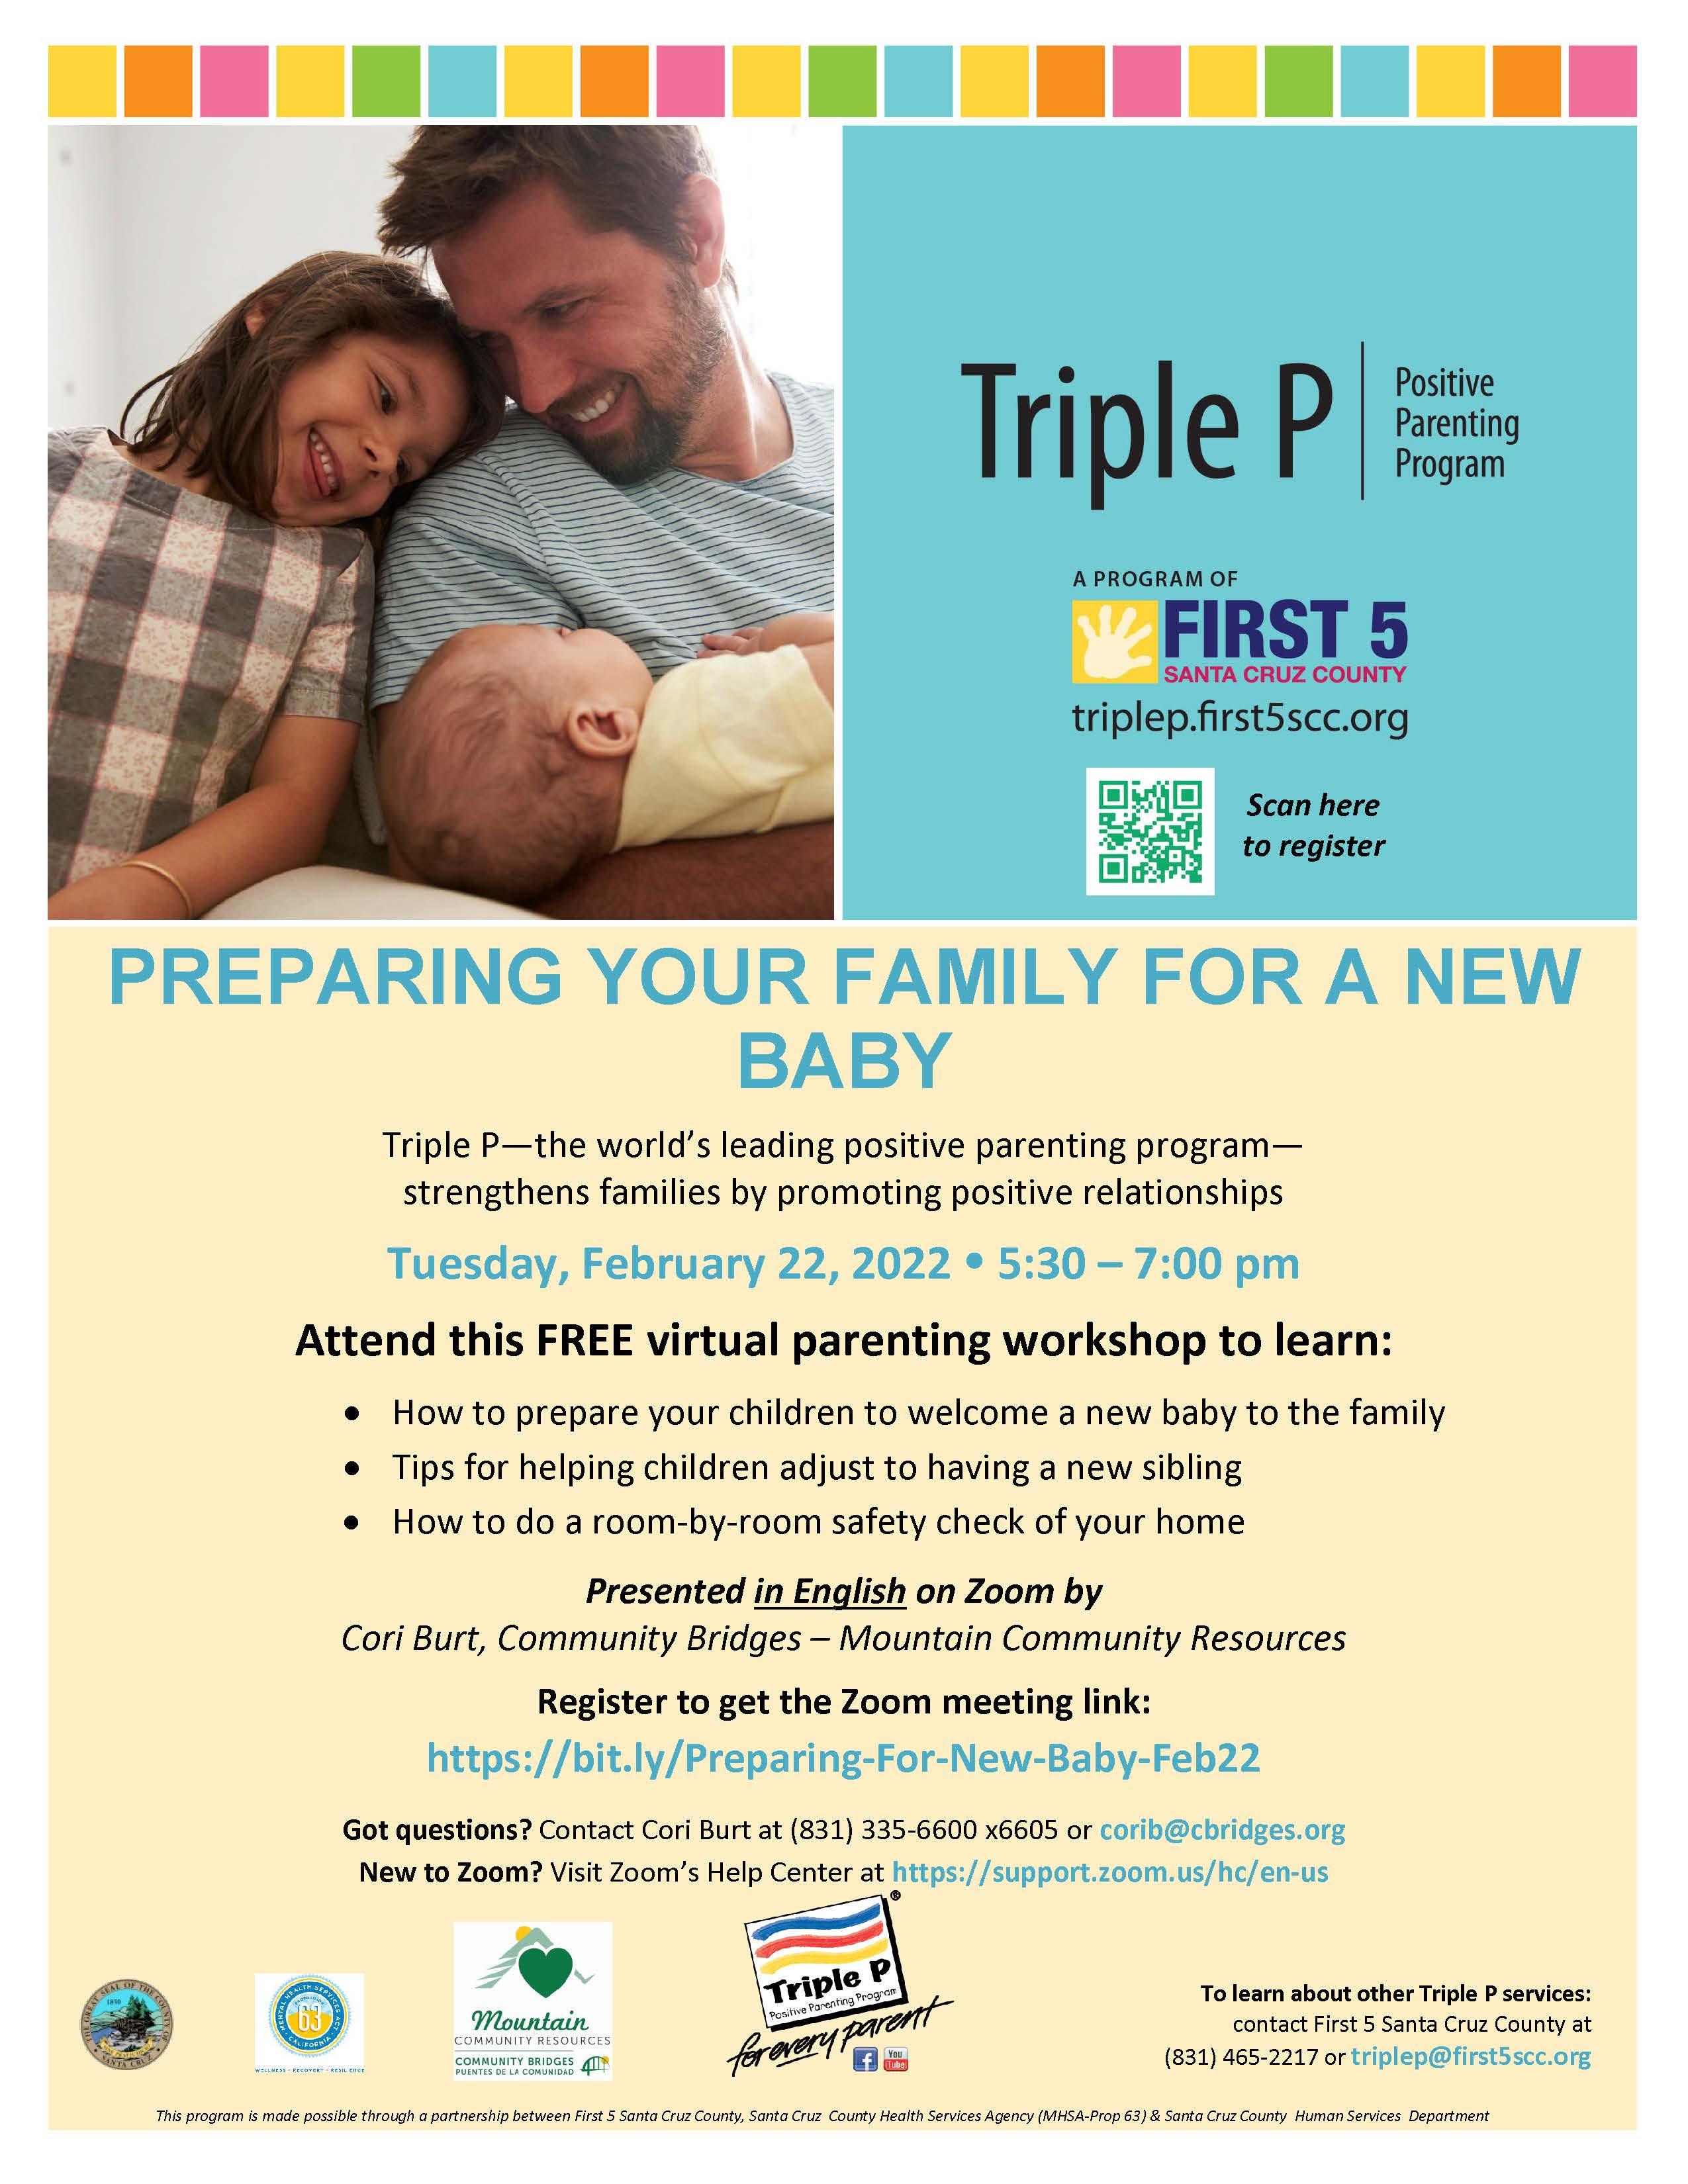 preparing your family for a new baby workshop; call 831-335-6600 x6605 for details